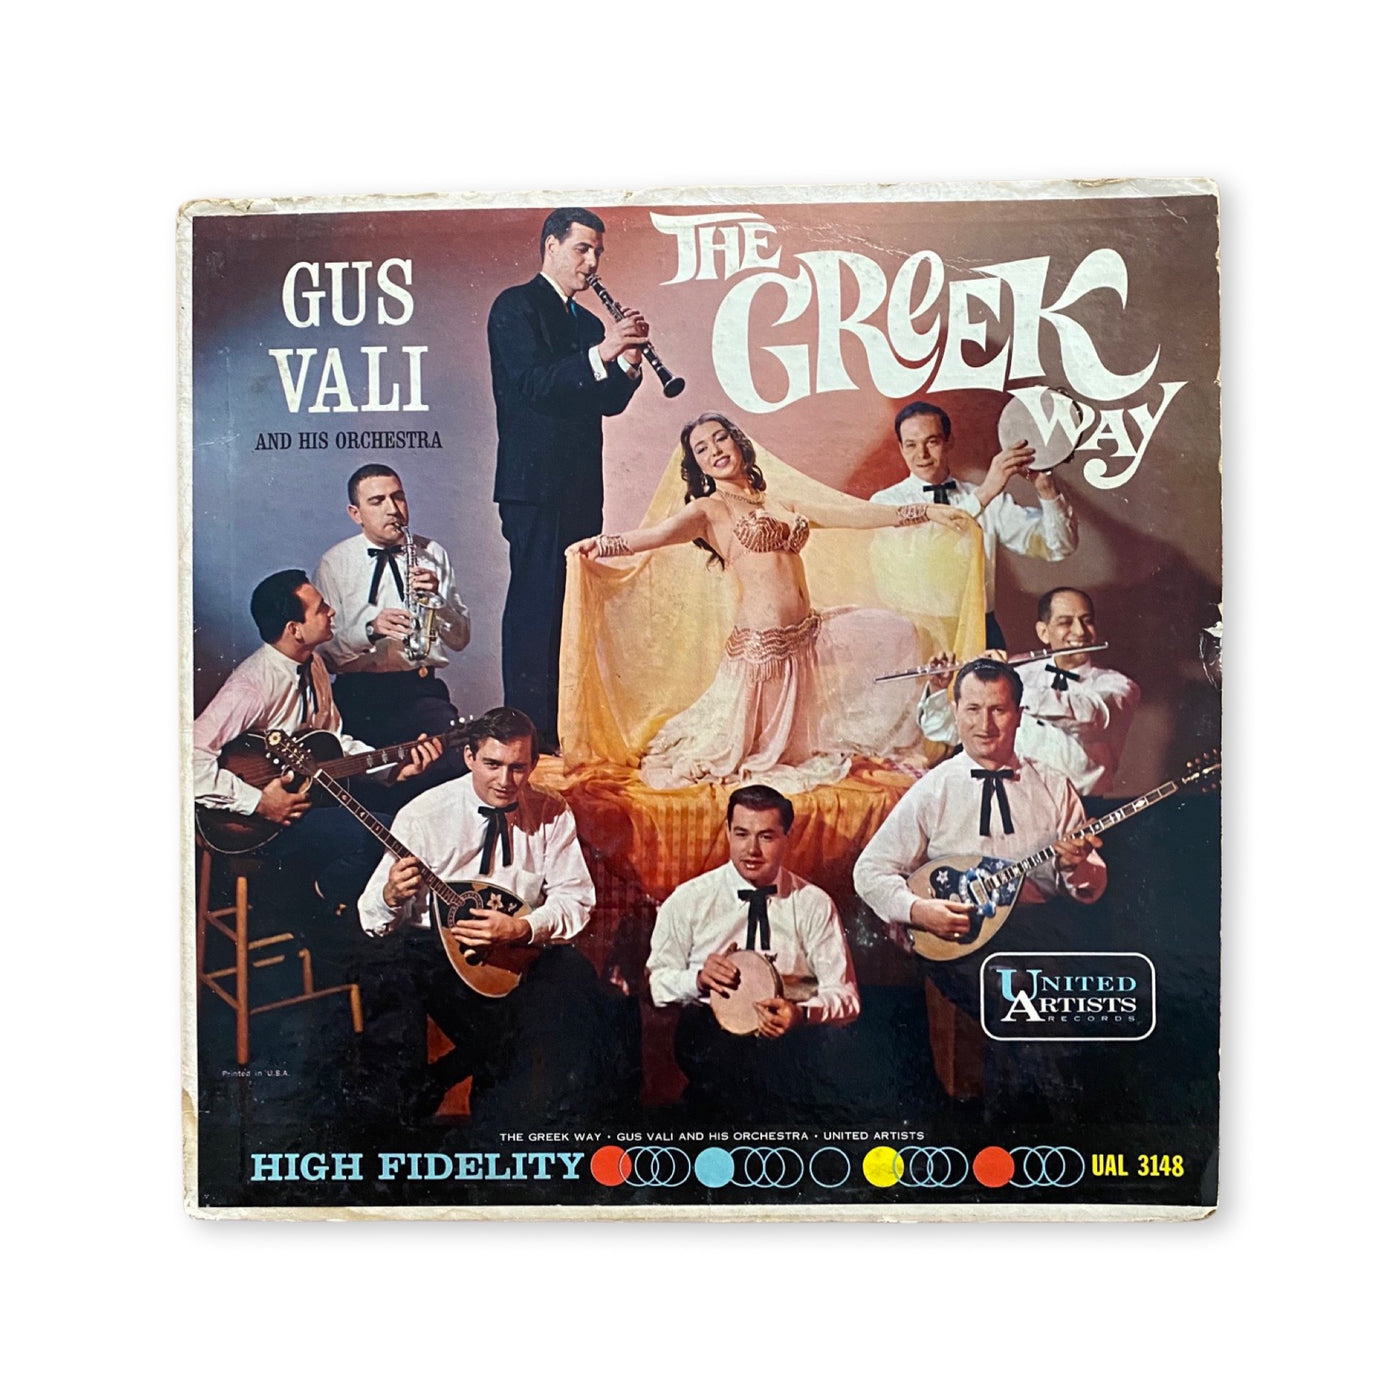 Gus Vali And His Orchestra - The Greek Way